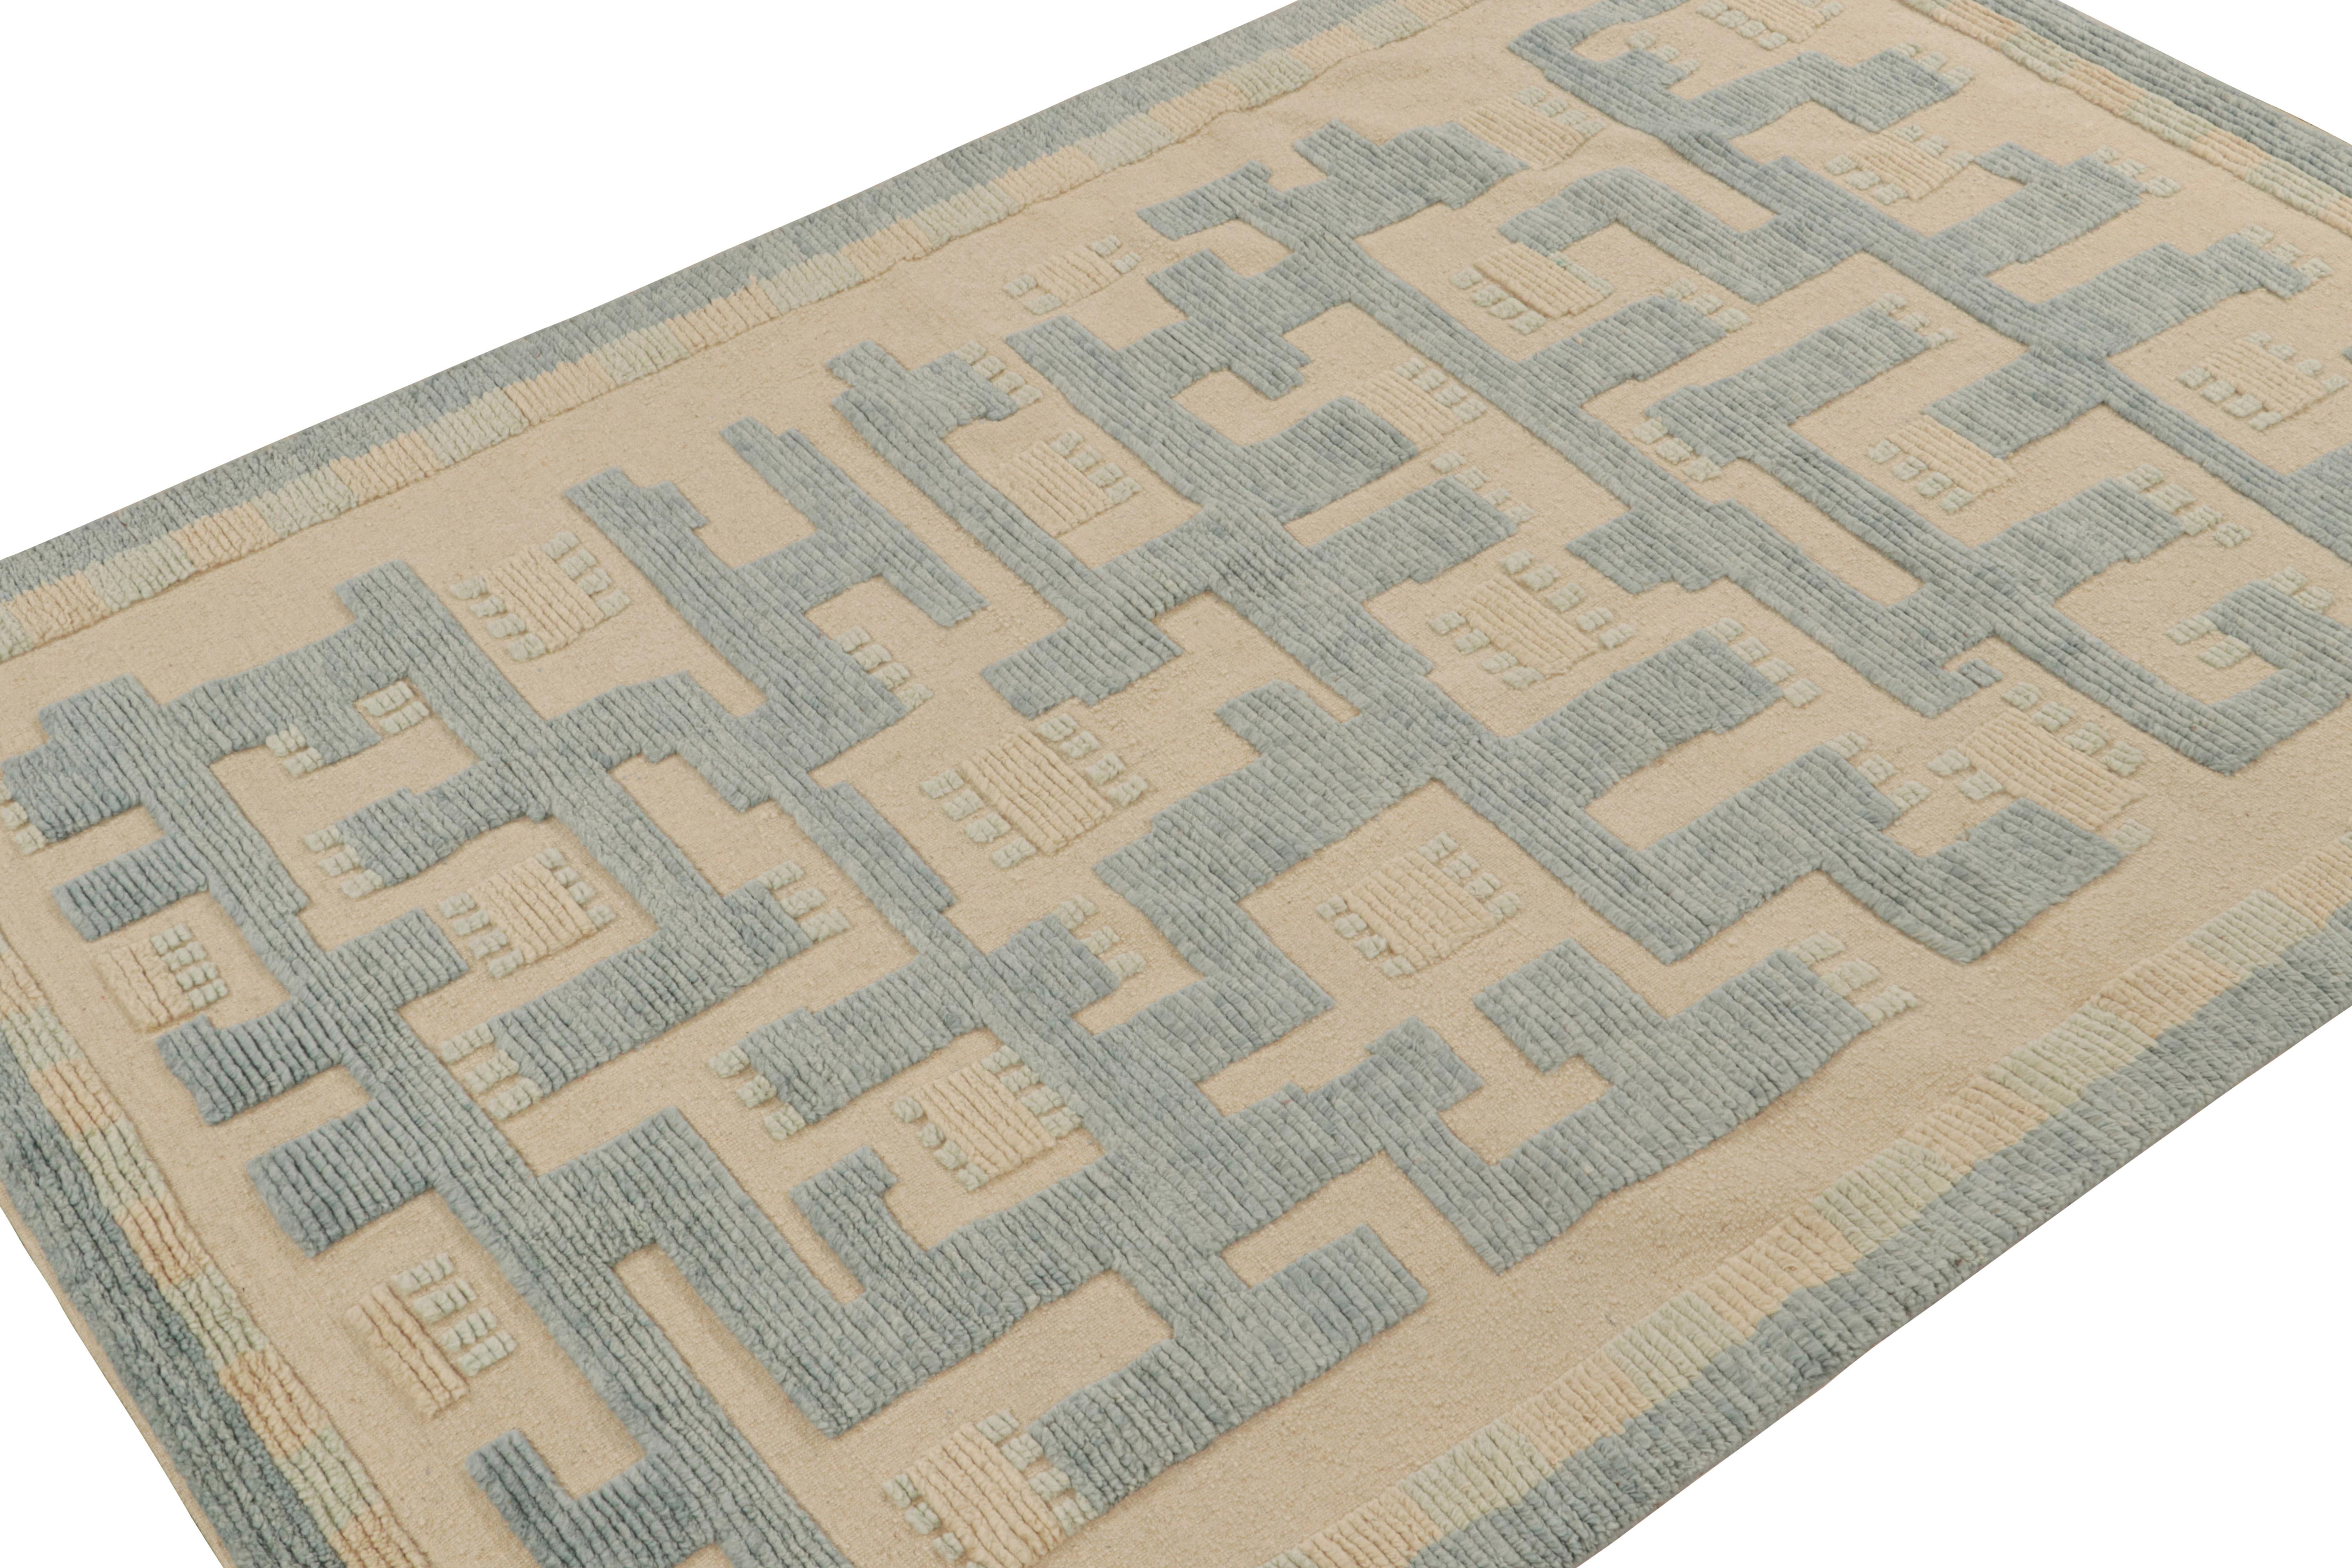 Hand-knotted in wool, a 6x9 rug from Rug & Kilim’s Scandinavian collection.

On the Design:

The Swedish style rug enjoys patterns in blue & beige. The texture has a subtle high-and-low element married to the geometry that lends its own depth and